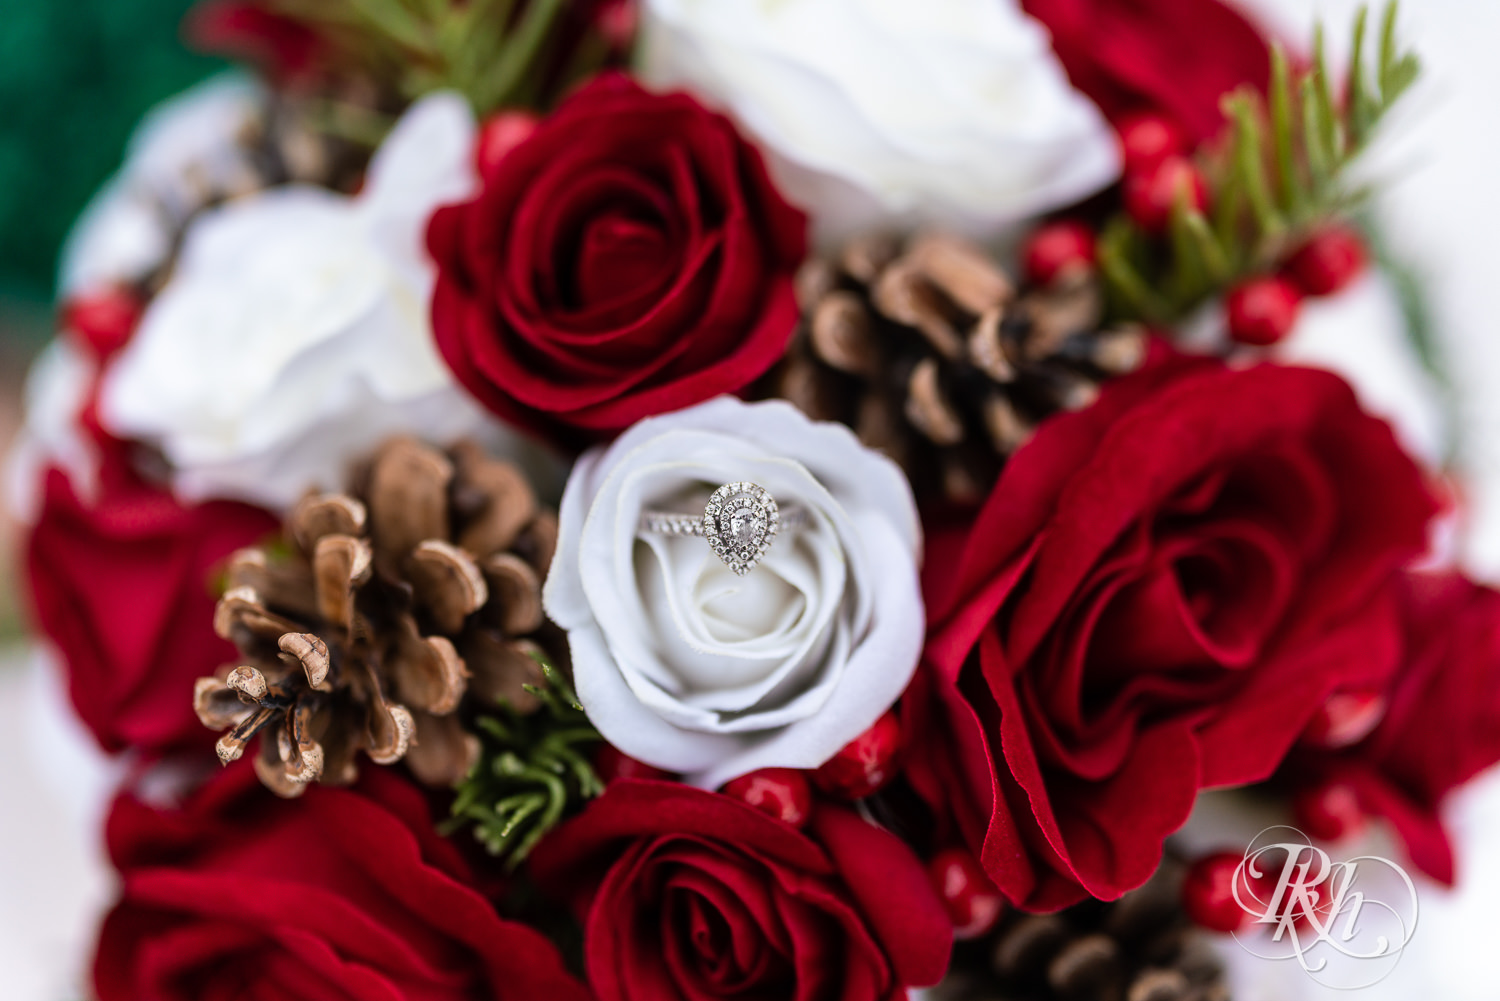 Wedding ring in pine cones and roses at Grand Superior Lodge in Two Harbors, Minnesota.